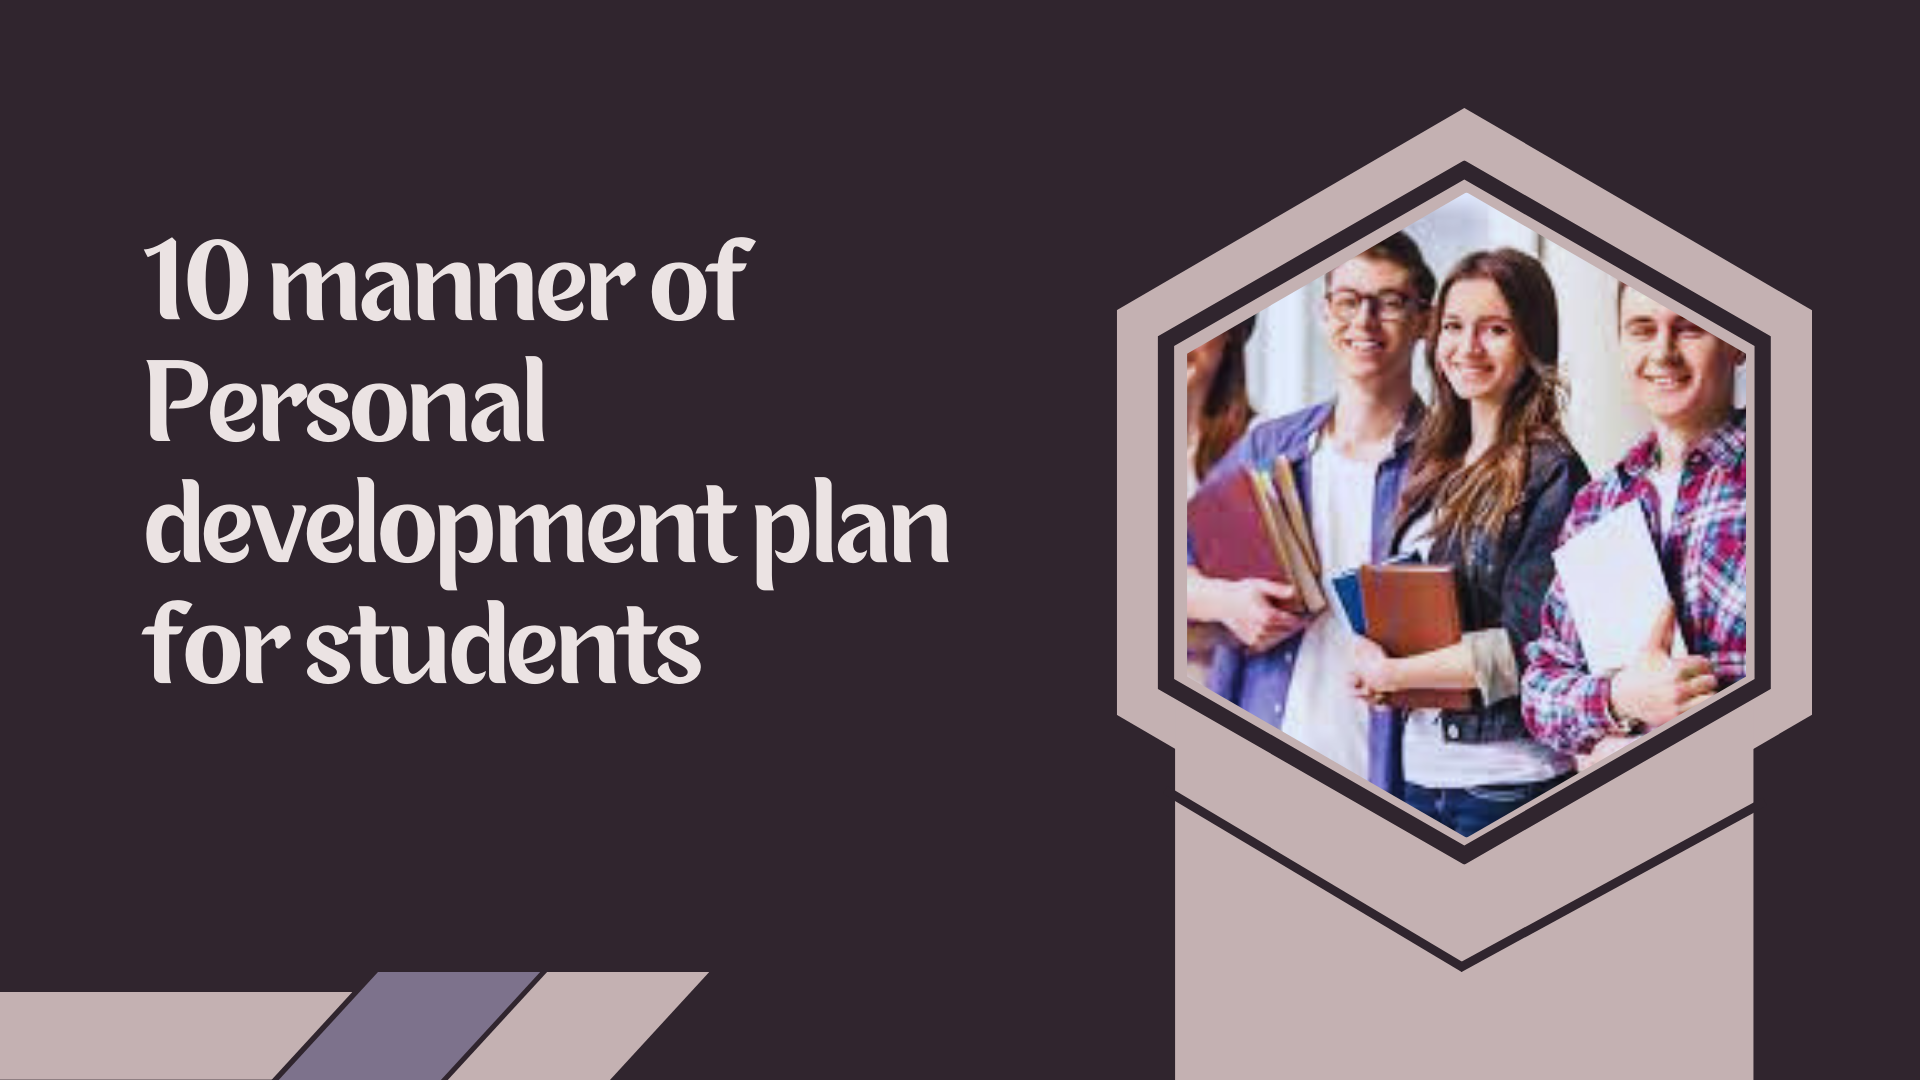 10-manner-of-Personal-development-plan-for-students